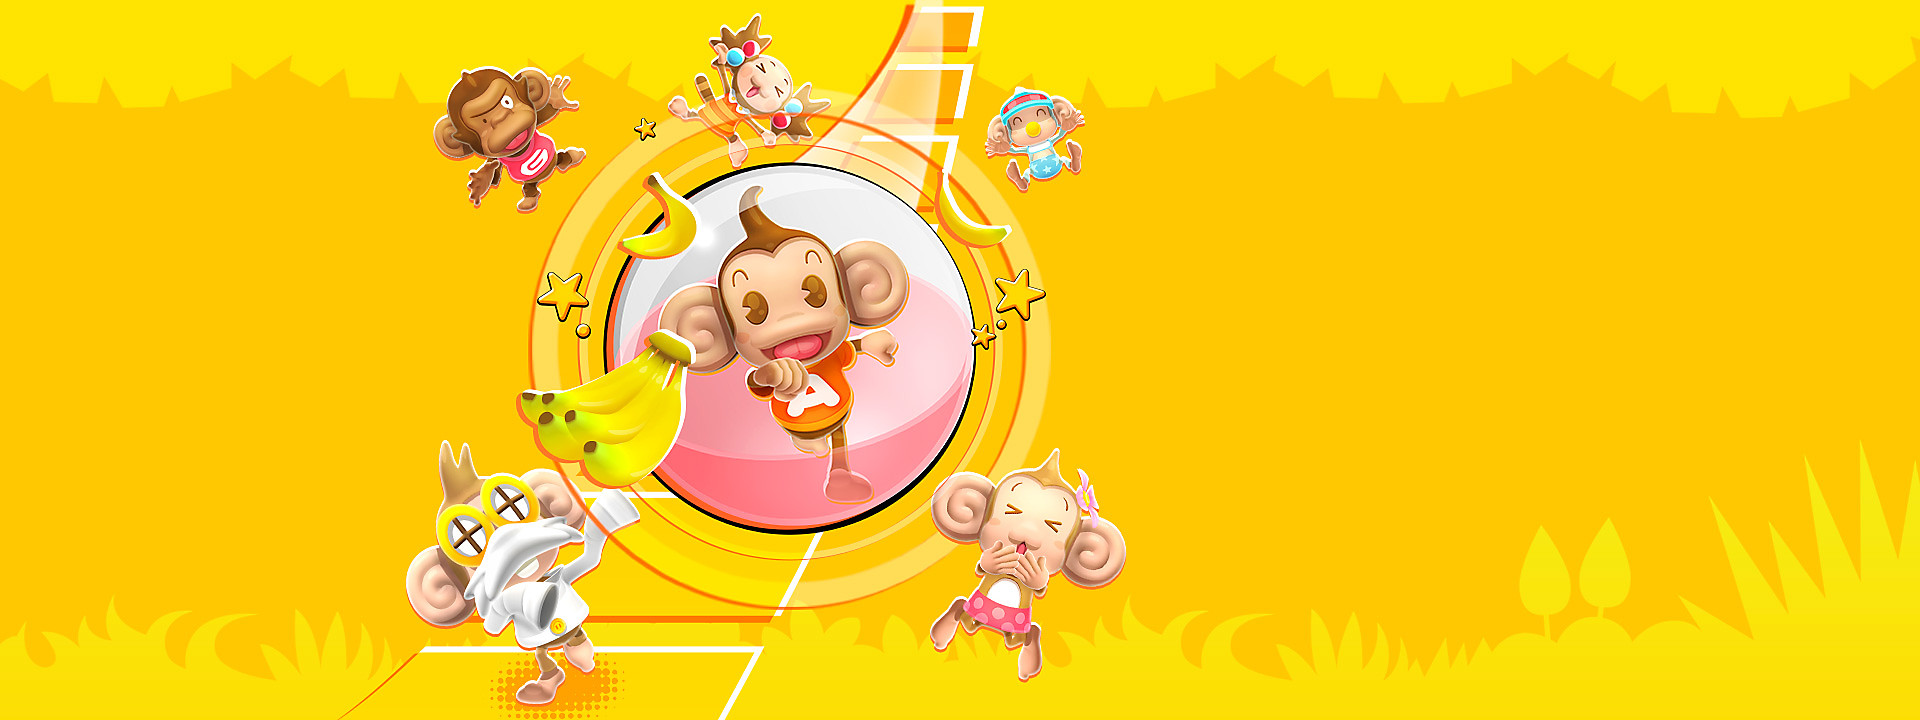 Next Super Monkey Ball Game: Everything We Know